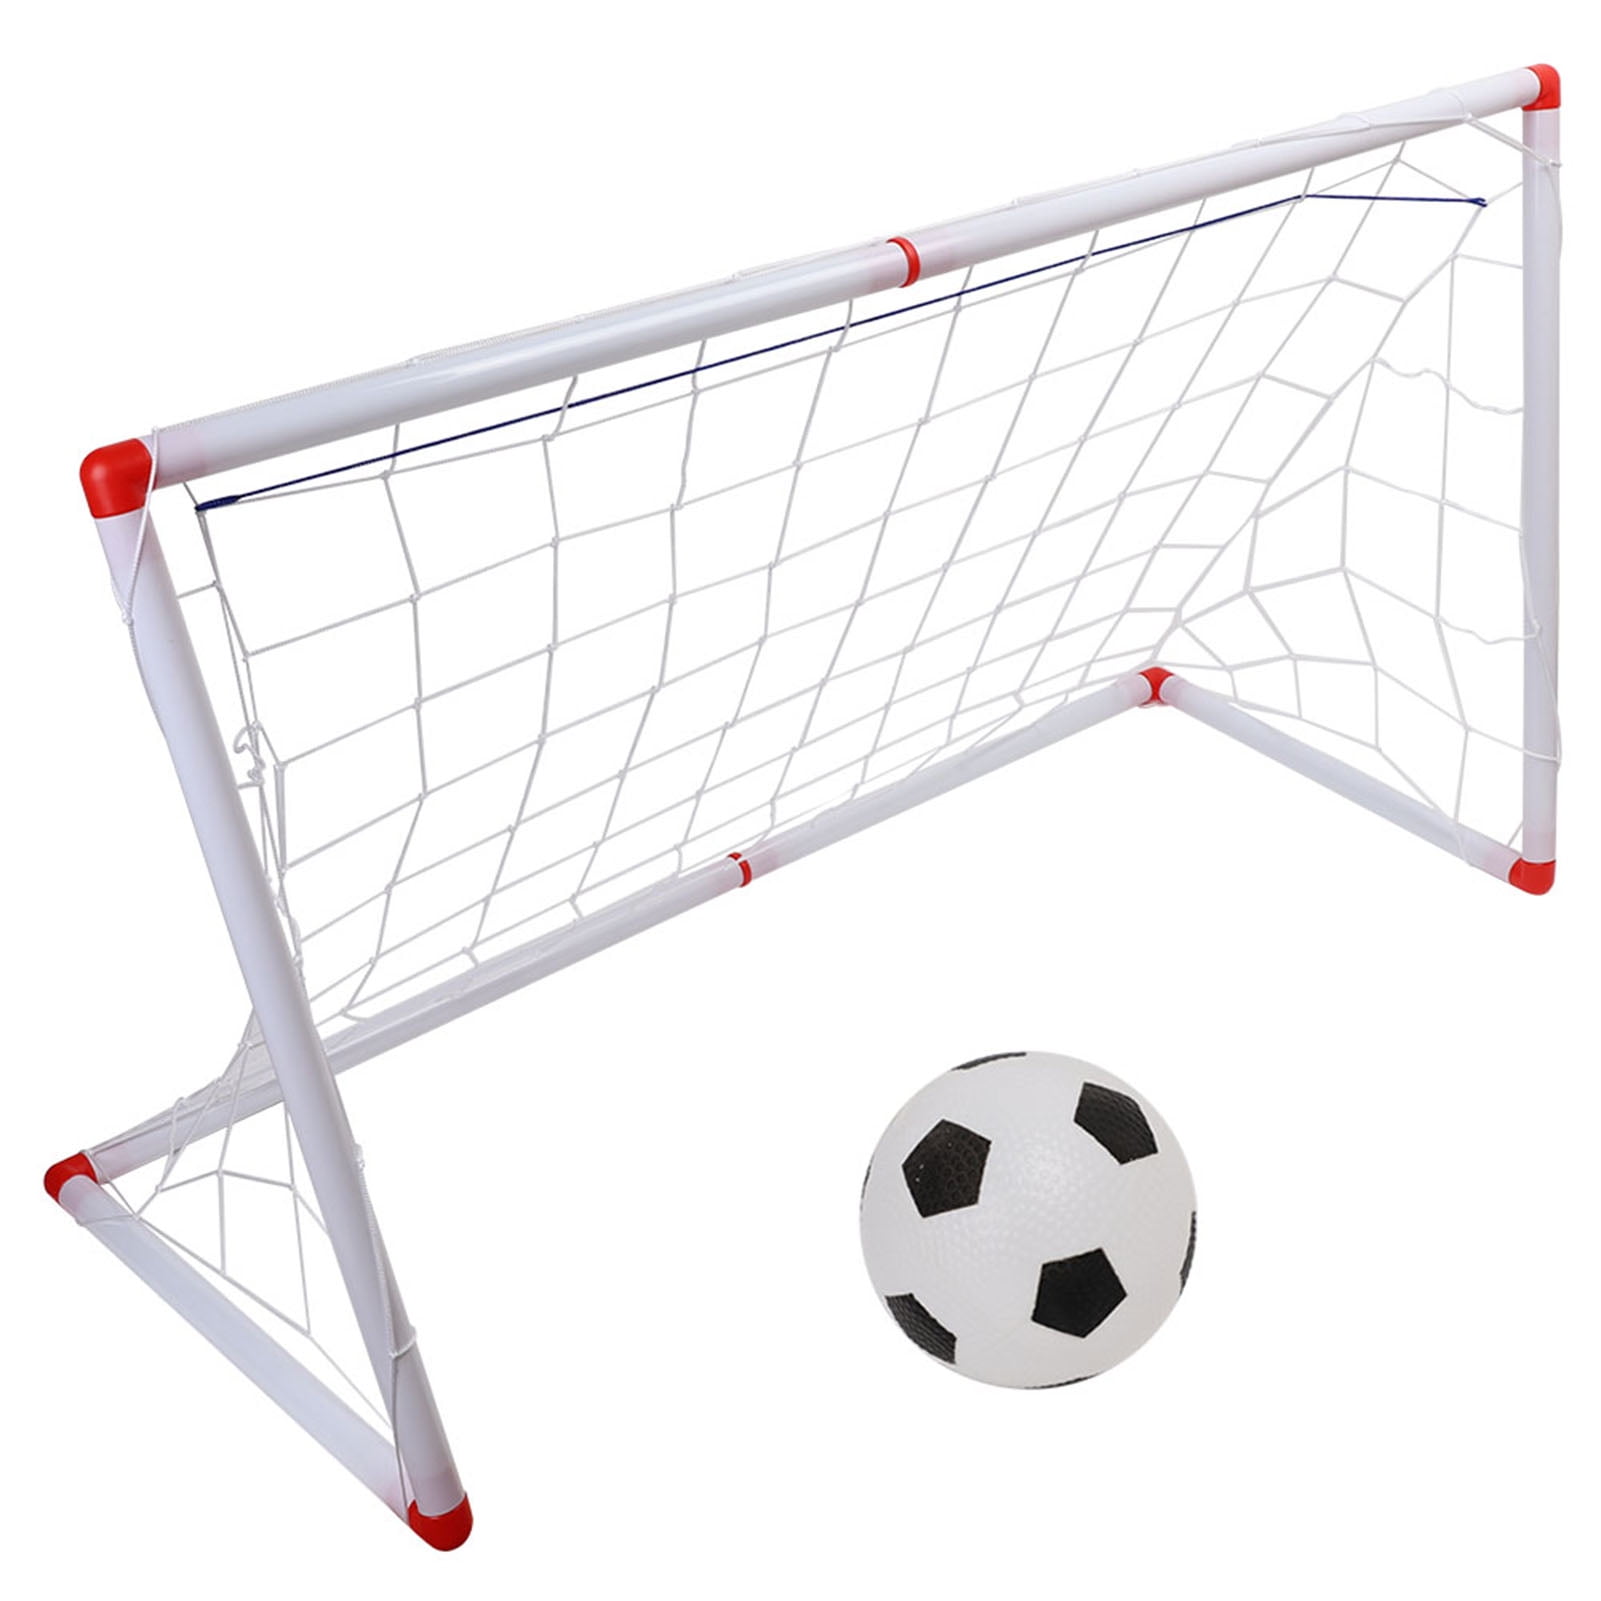 PARKS OUTDOOR KIDS CHILD FOOTBALL SOCCER GOAL POST NET BALL PUMP TOY EXERCISE 